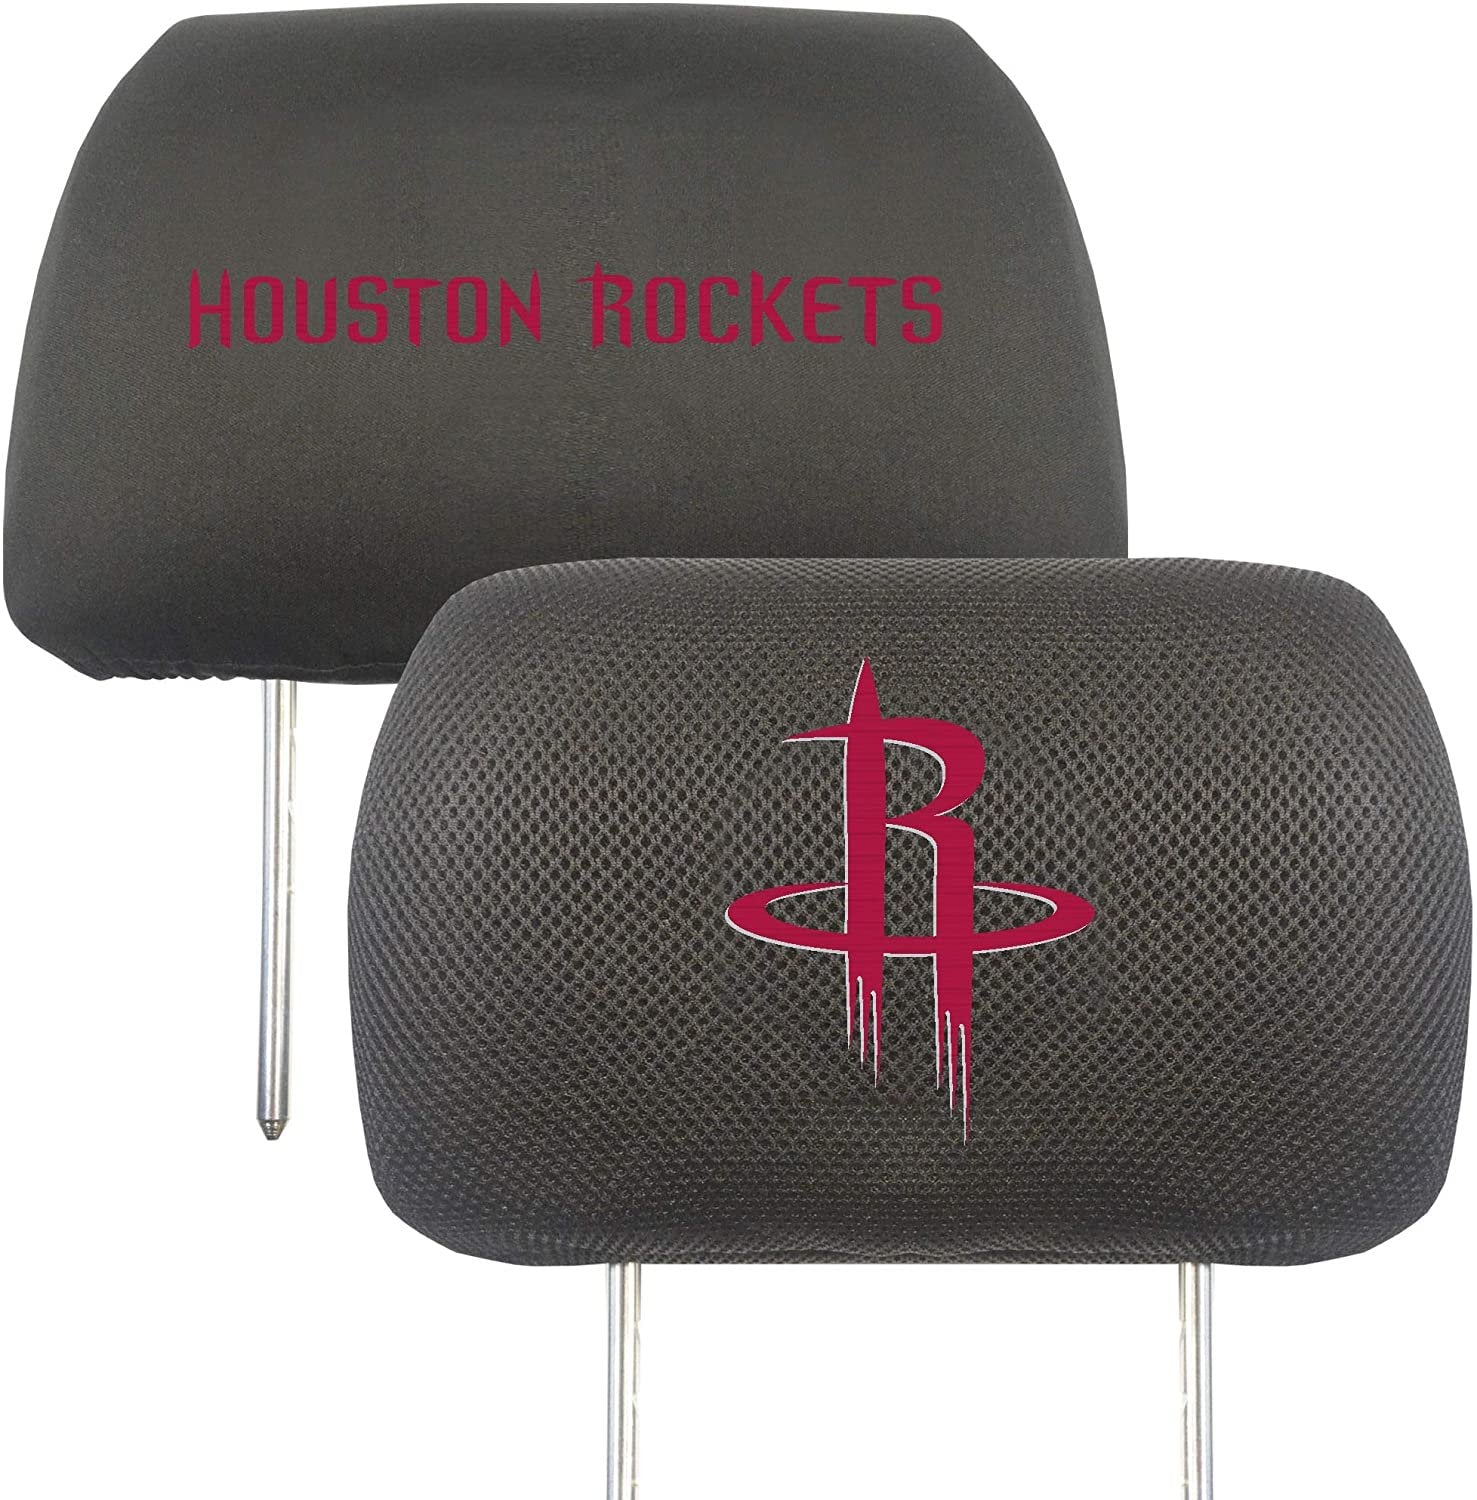 Houston Rockets Pair of Premium Auto Head Rest Covers, Embroidered, Black Elastic, 14x10 Inch